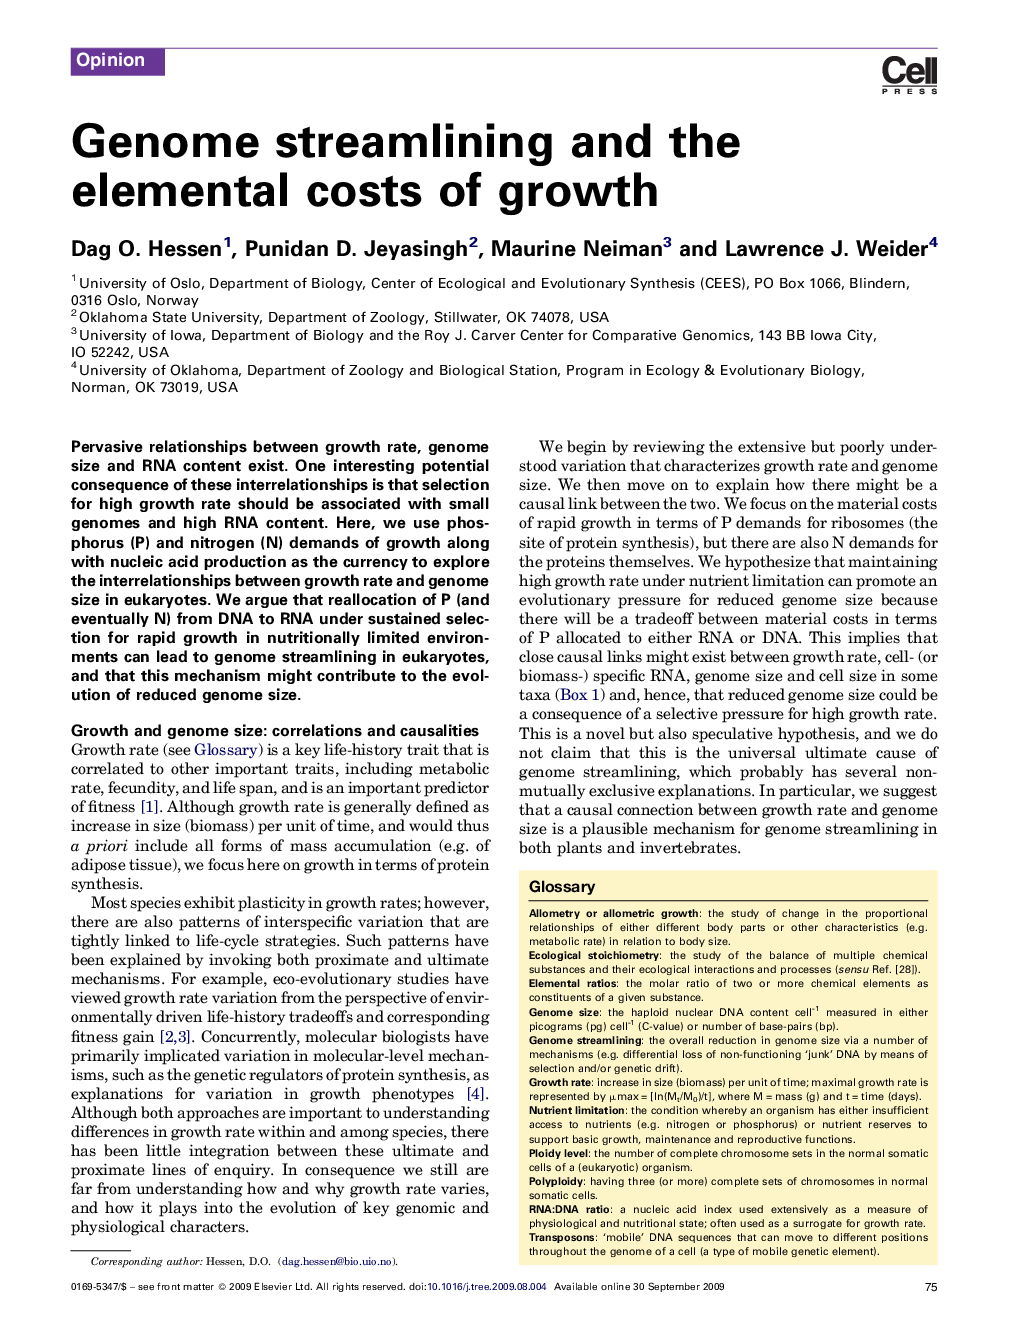 Genome streamlining and the elemental costs of growth